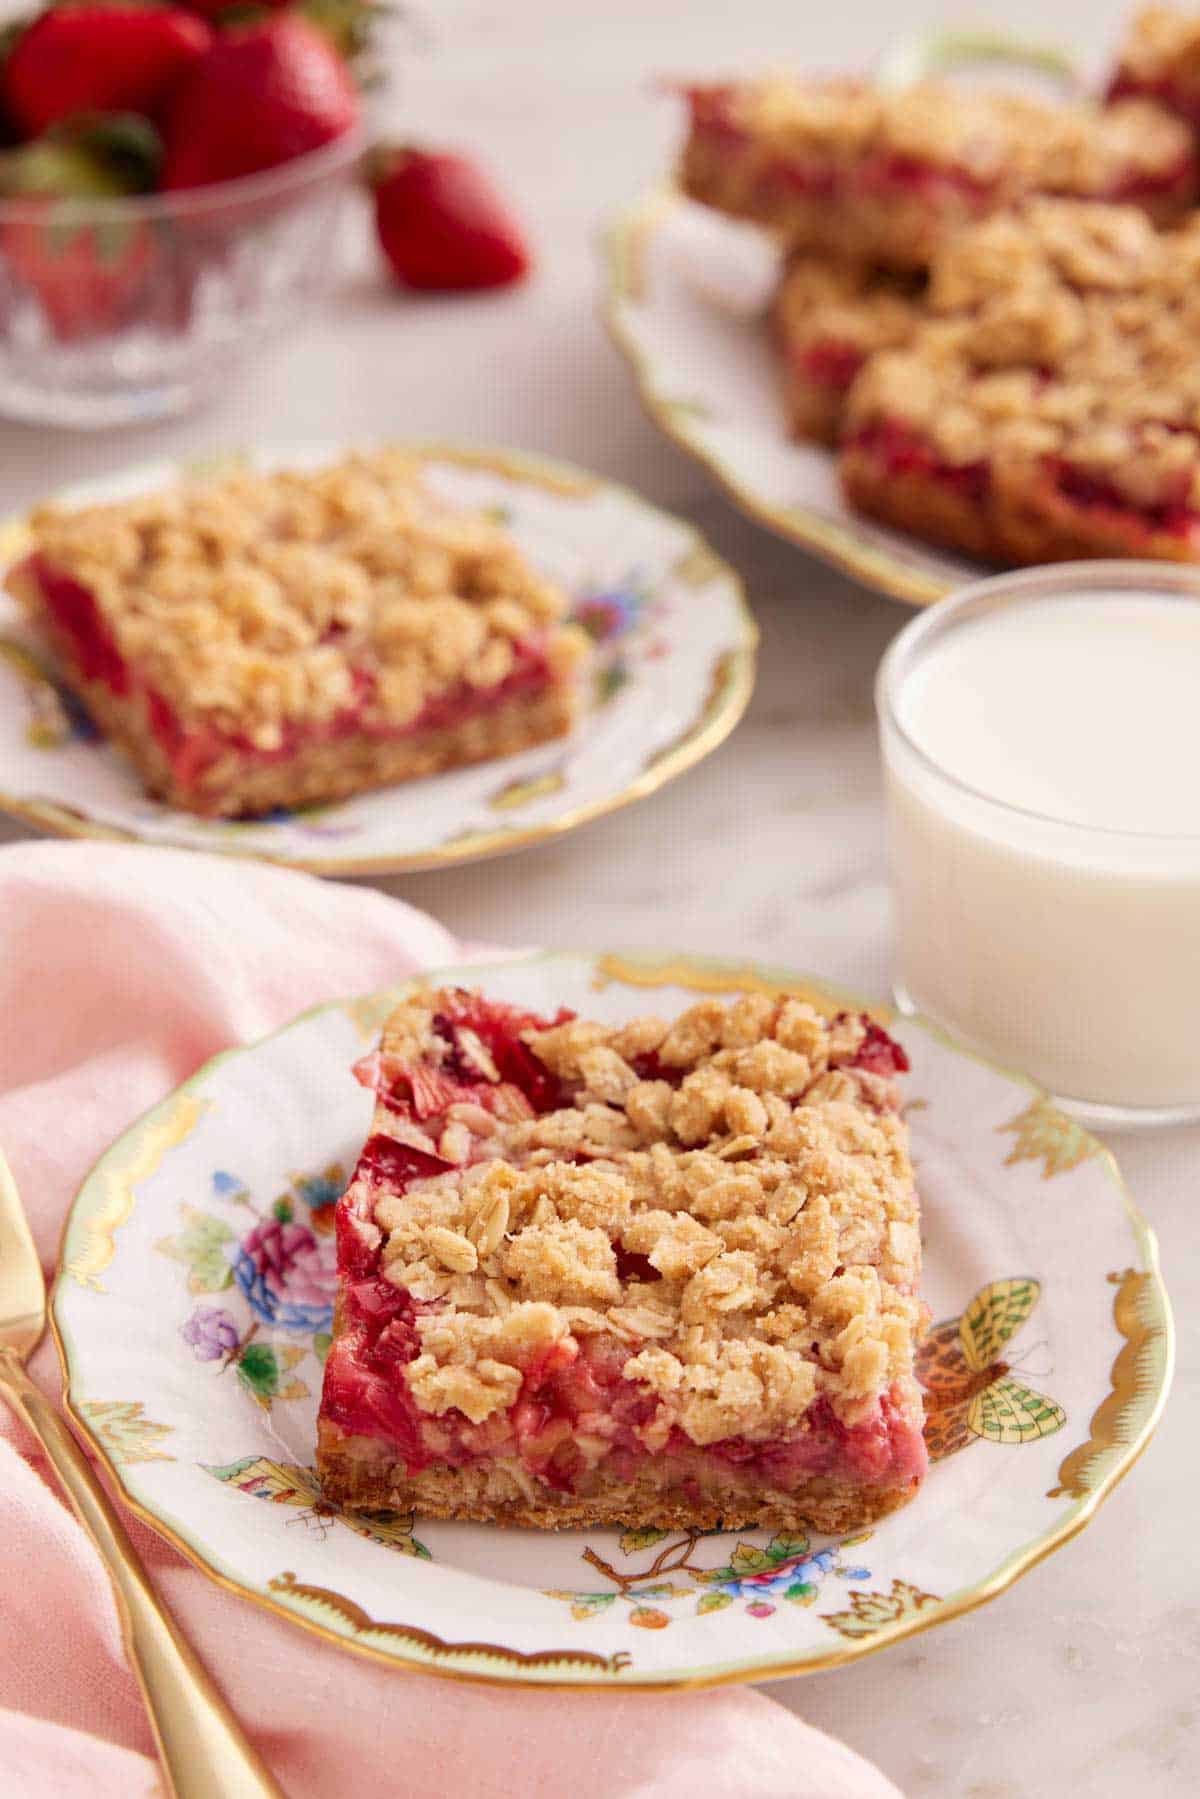 A couple plates with strawberry rhubarb bars and a glass of milk.